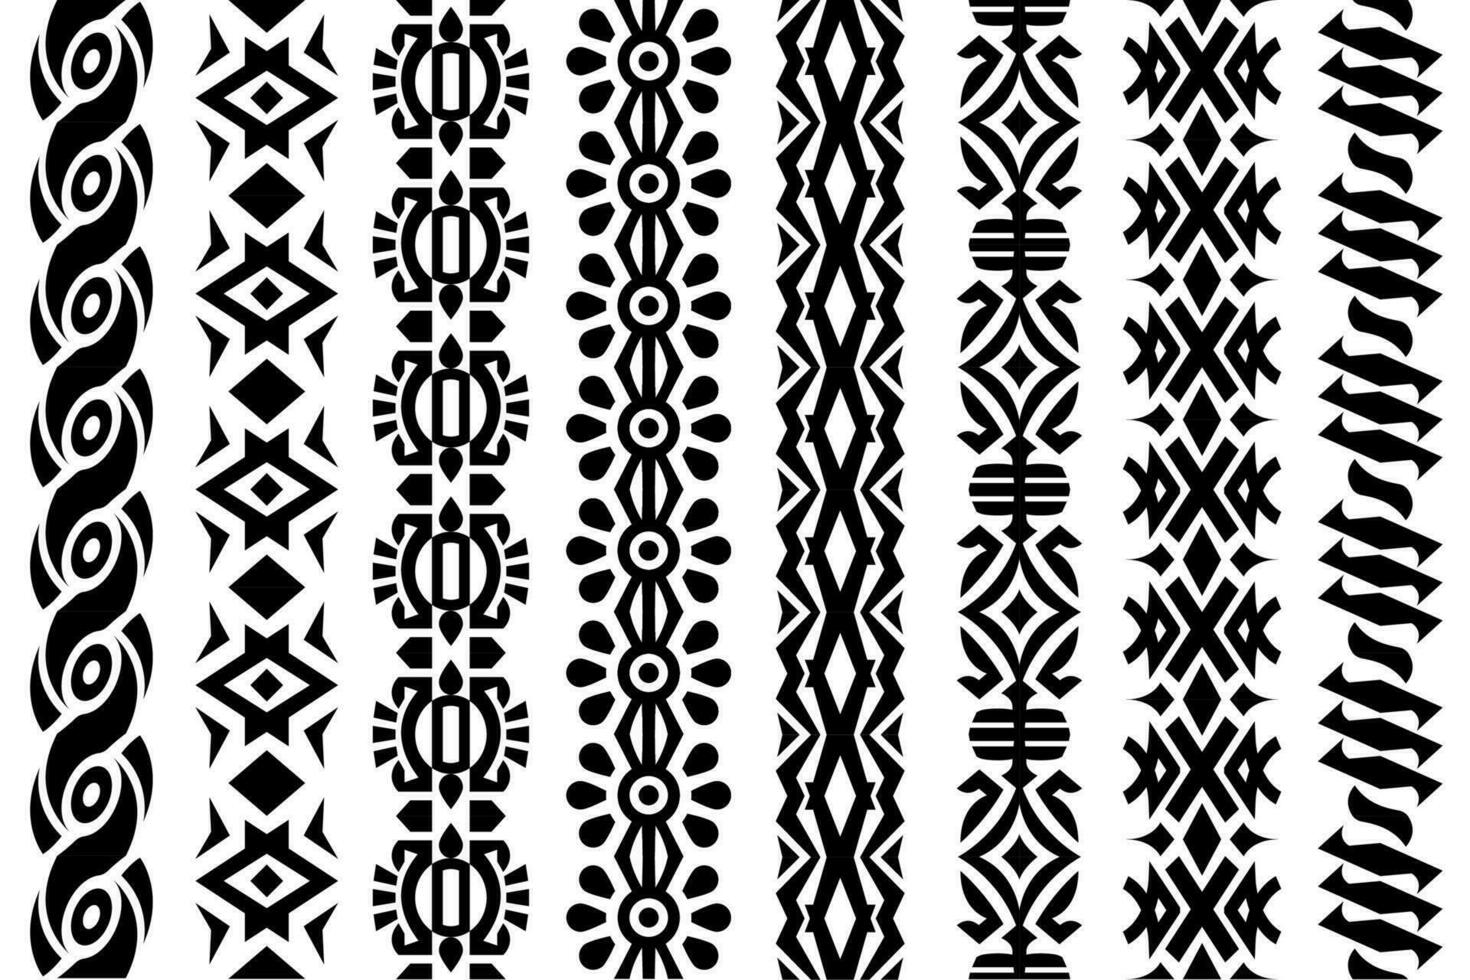 Abstract lace, trim decorative design elements. Black seamless repeating lace ribbon, tape collection for your design projects vector